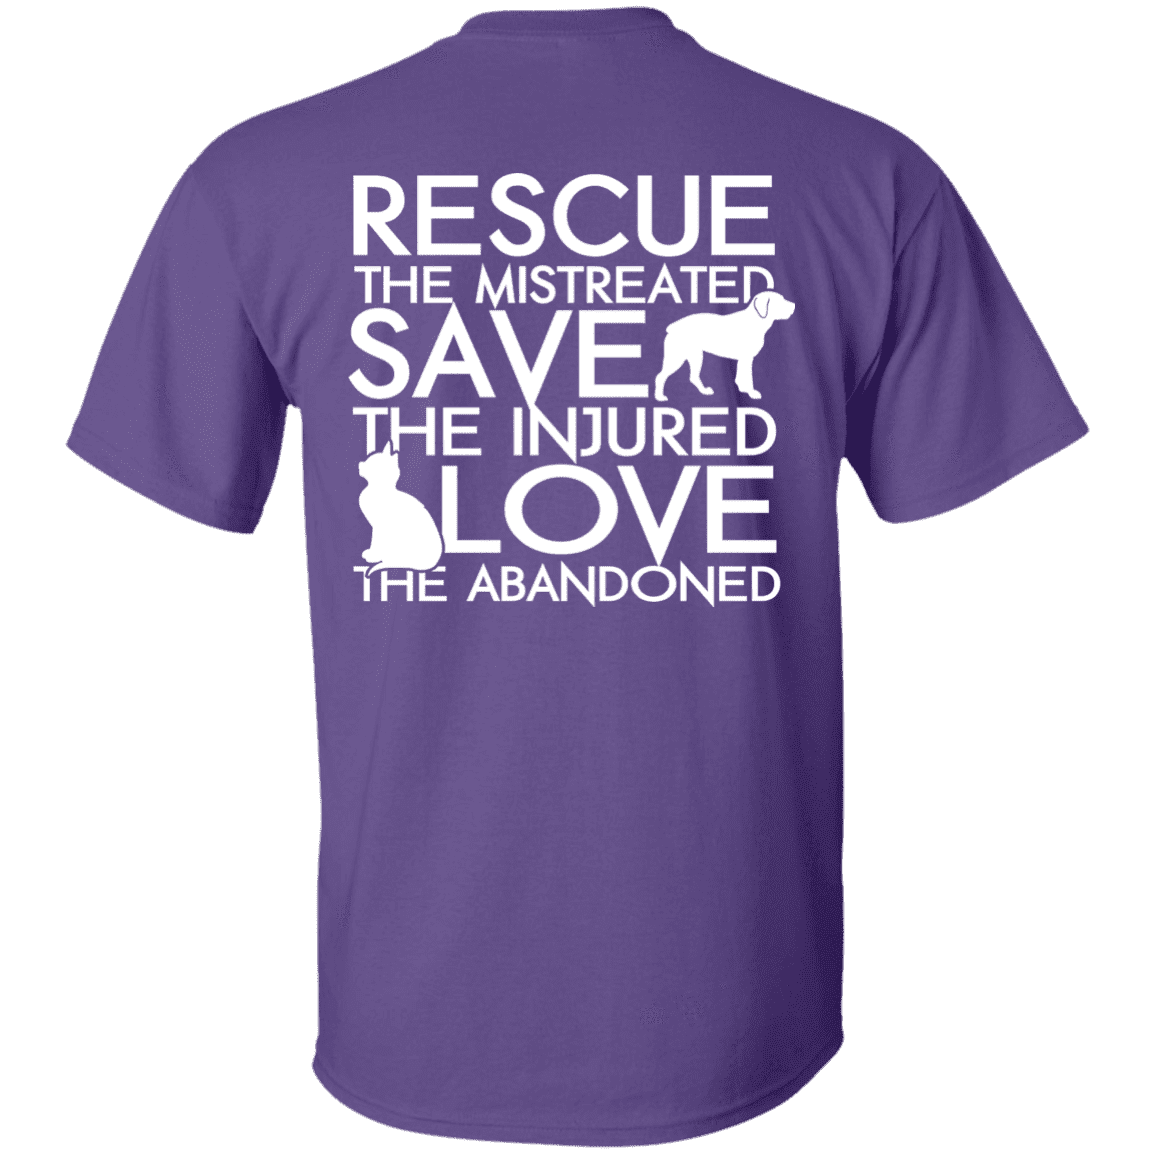 Rescue Save Love - T Shirt.